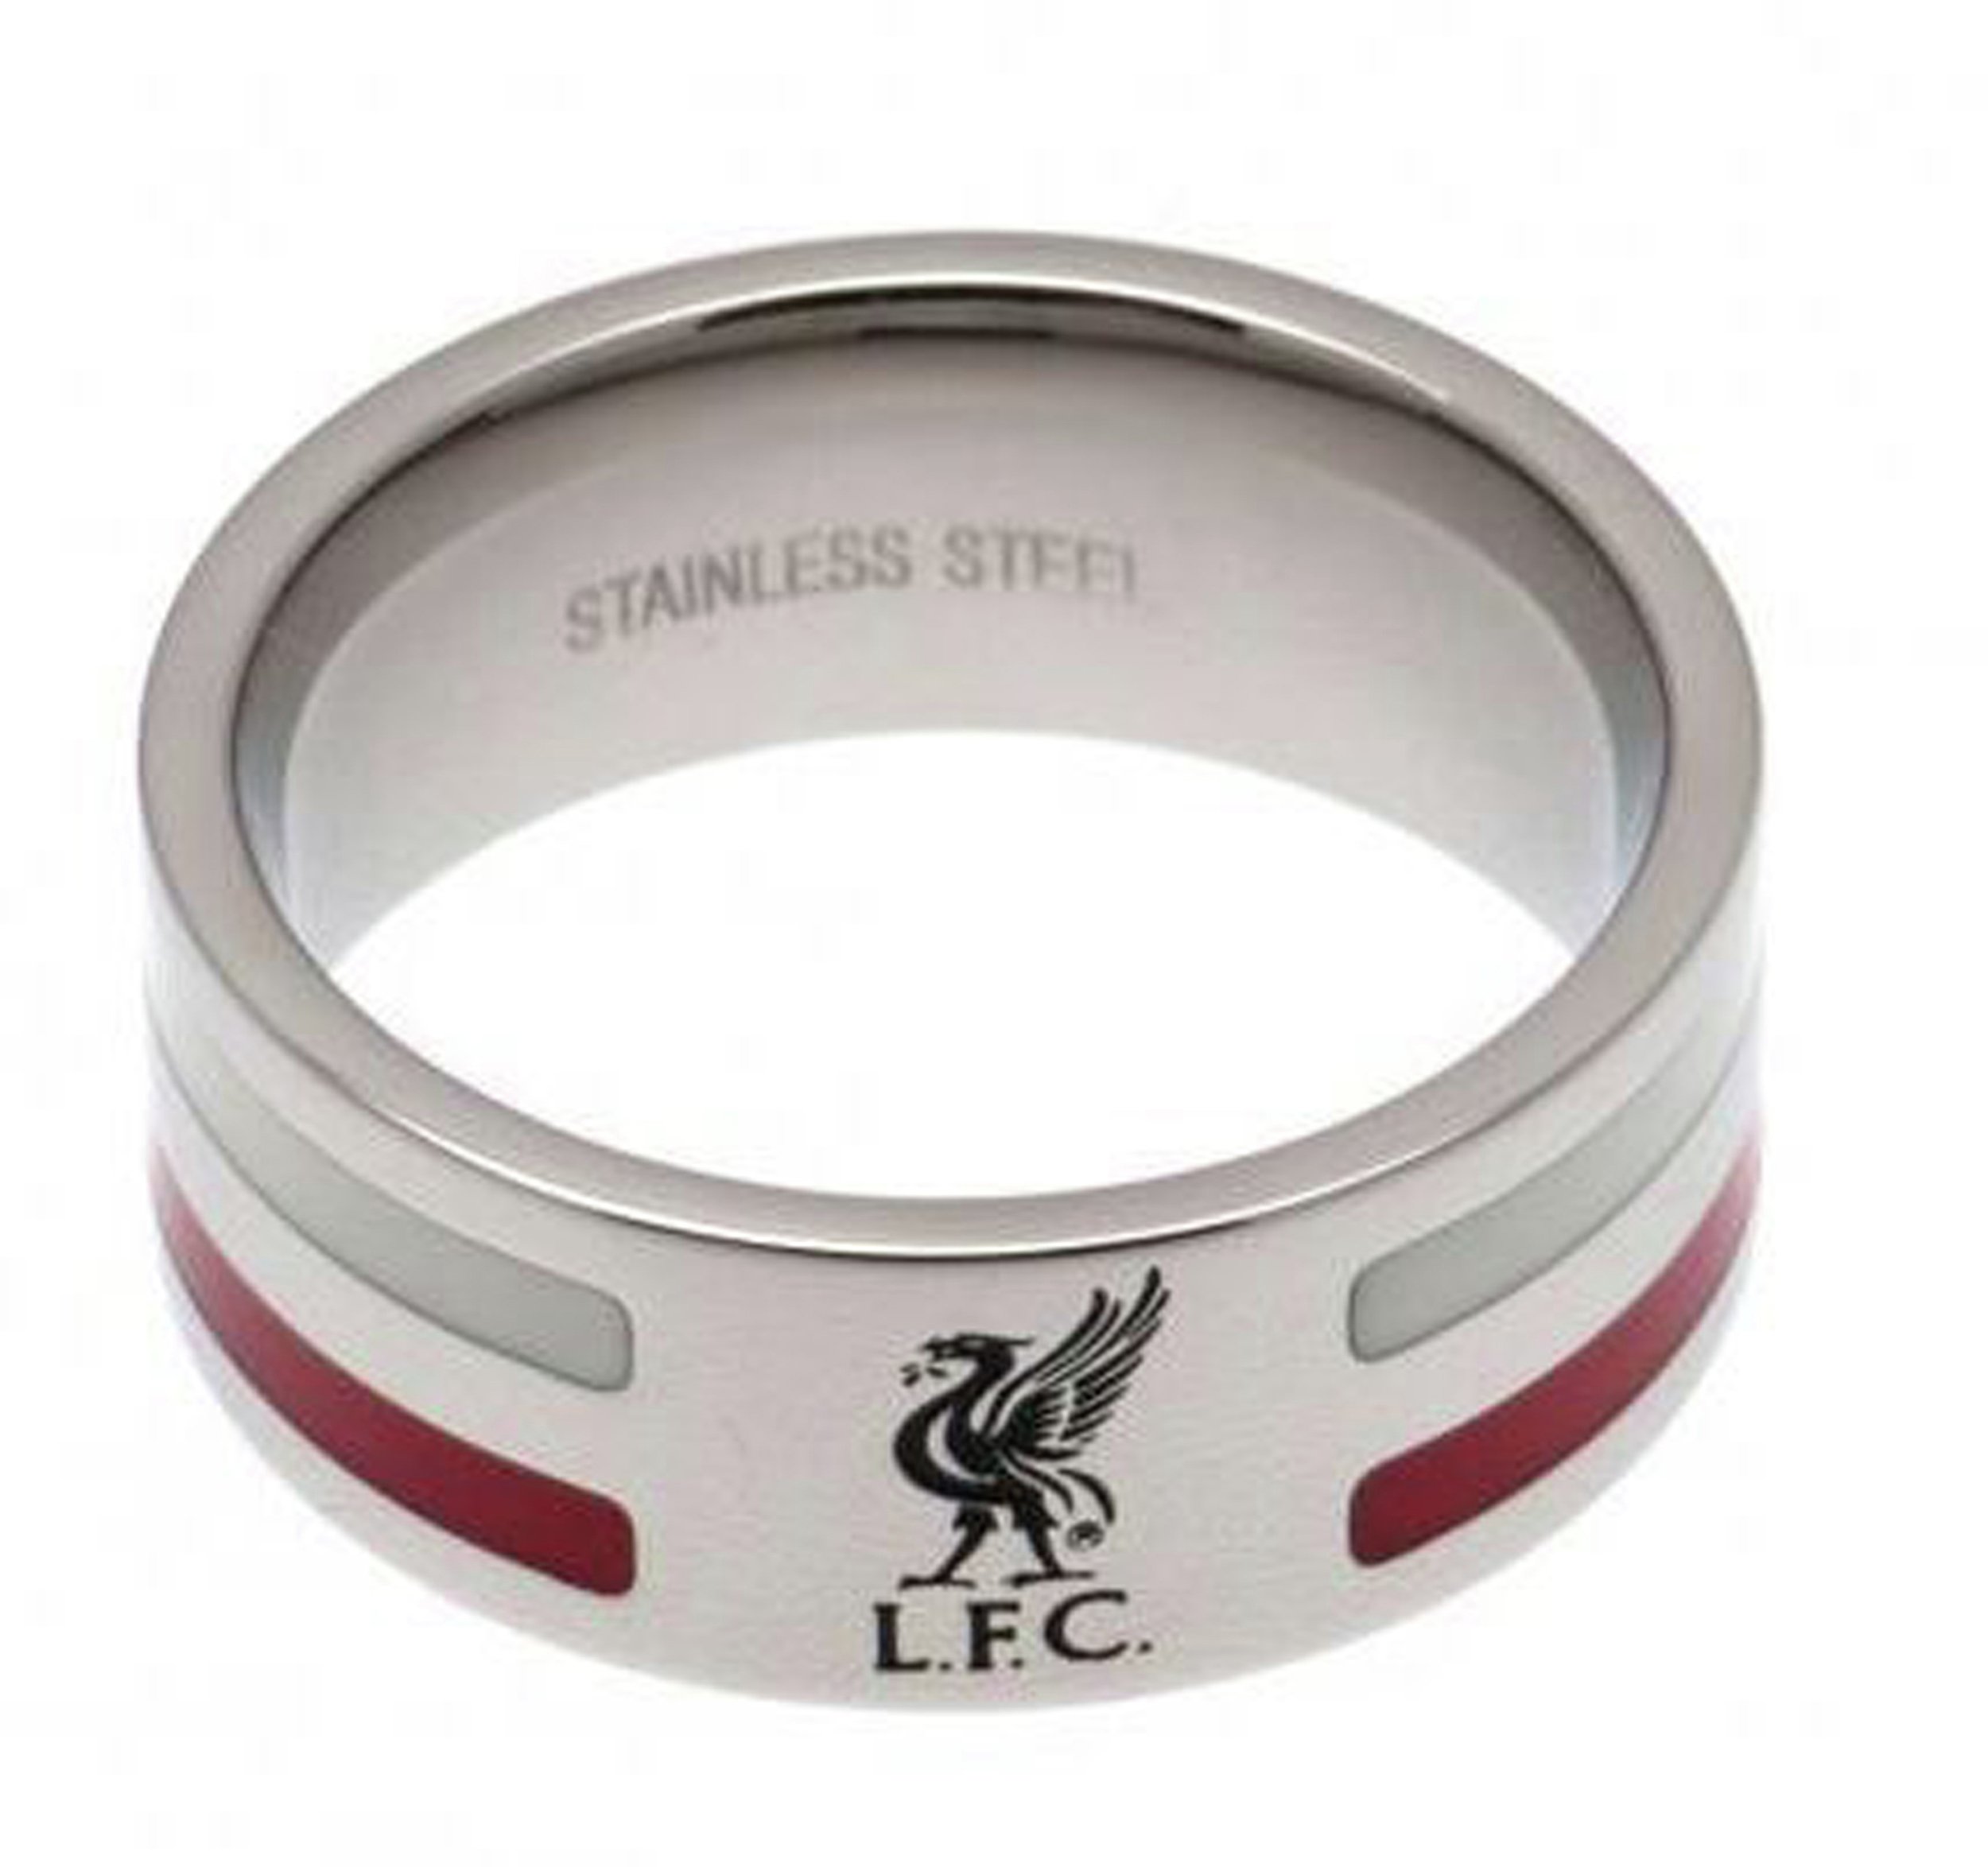 Stainless Steel Liverpool Striped Ring - Size X